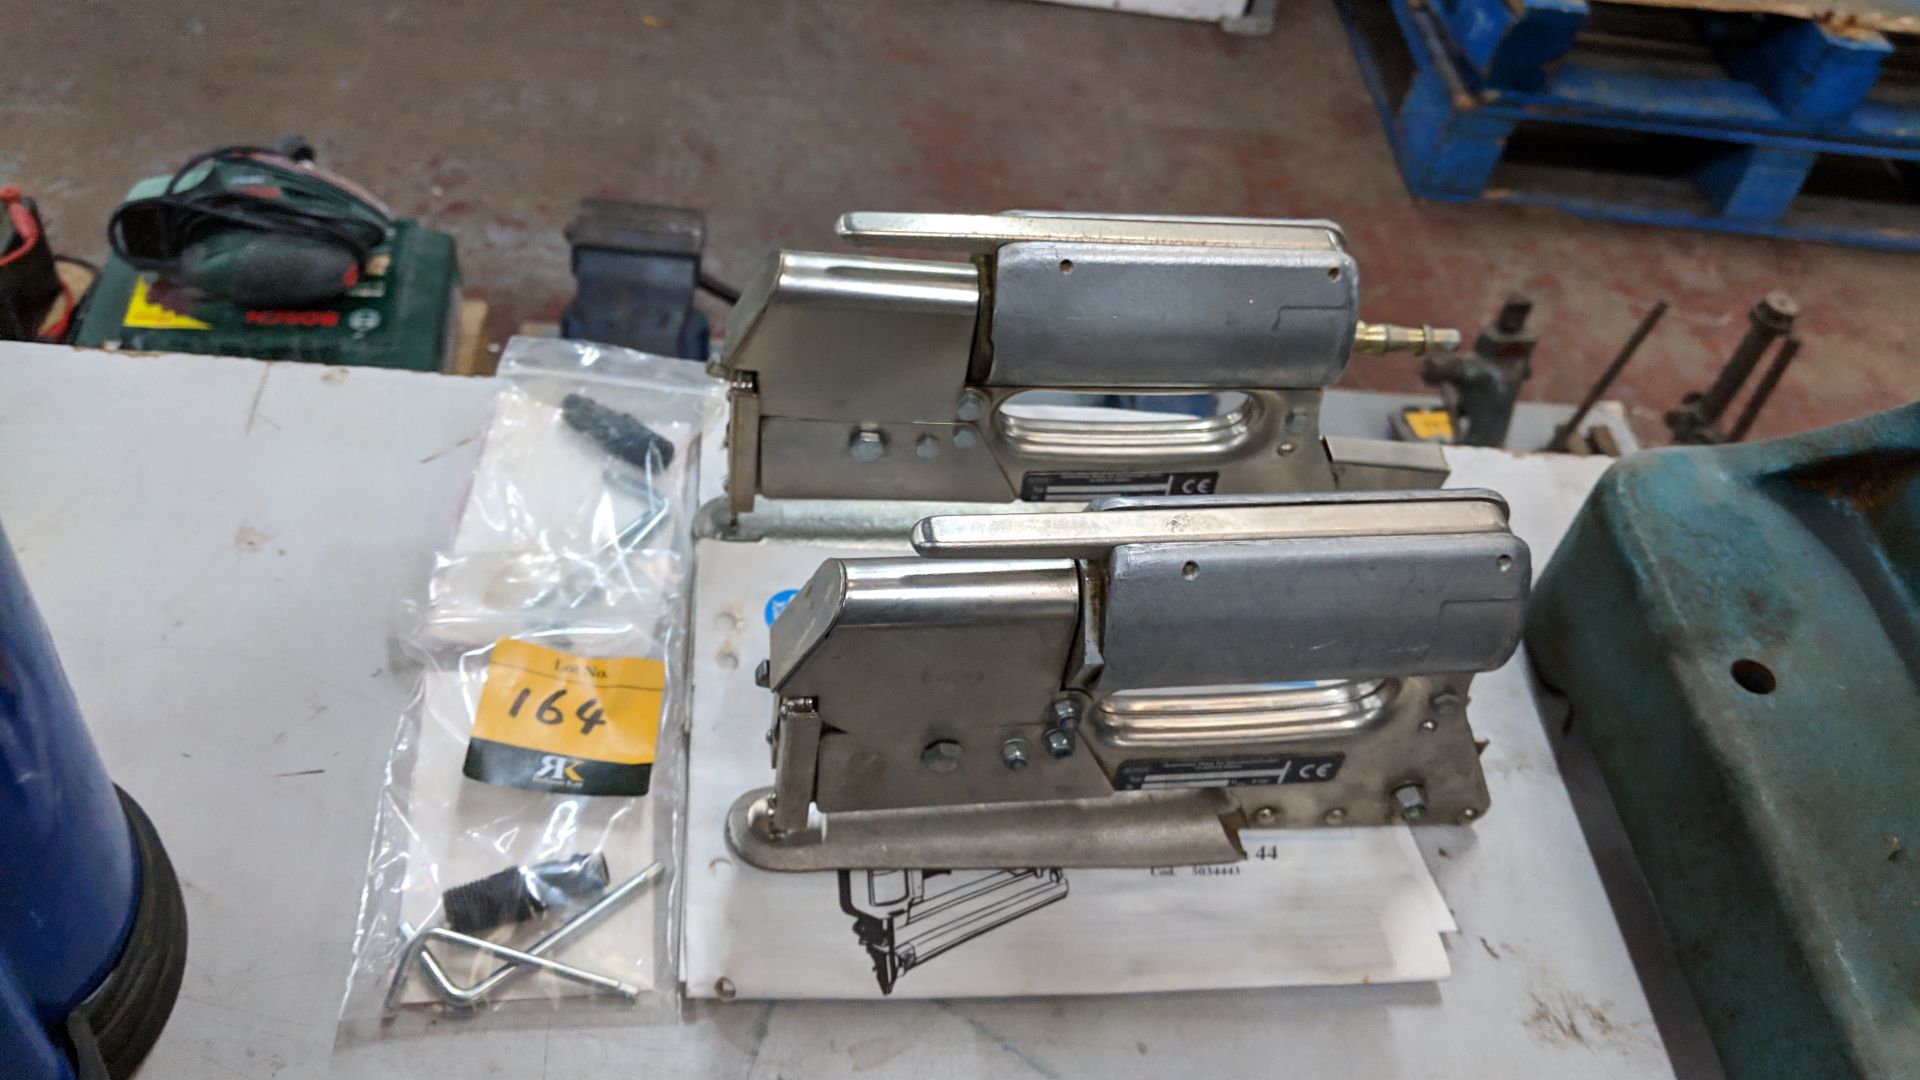 2 off air staplers IMPORTANT: Please remember goods successfully bid upon must be paid for and